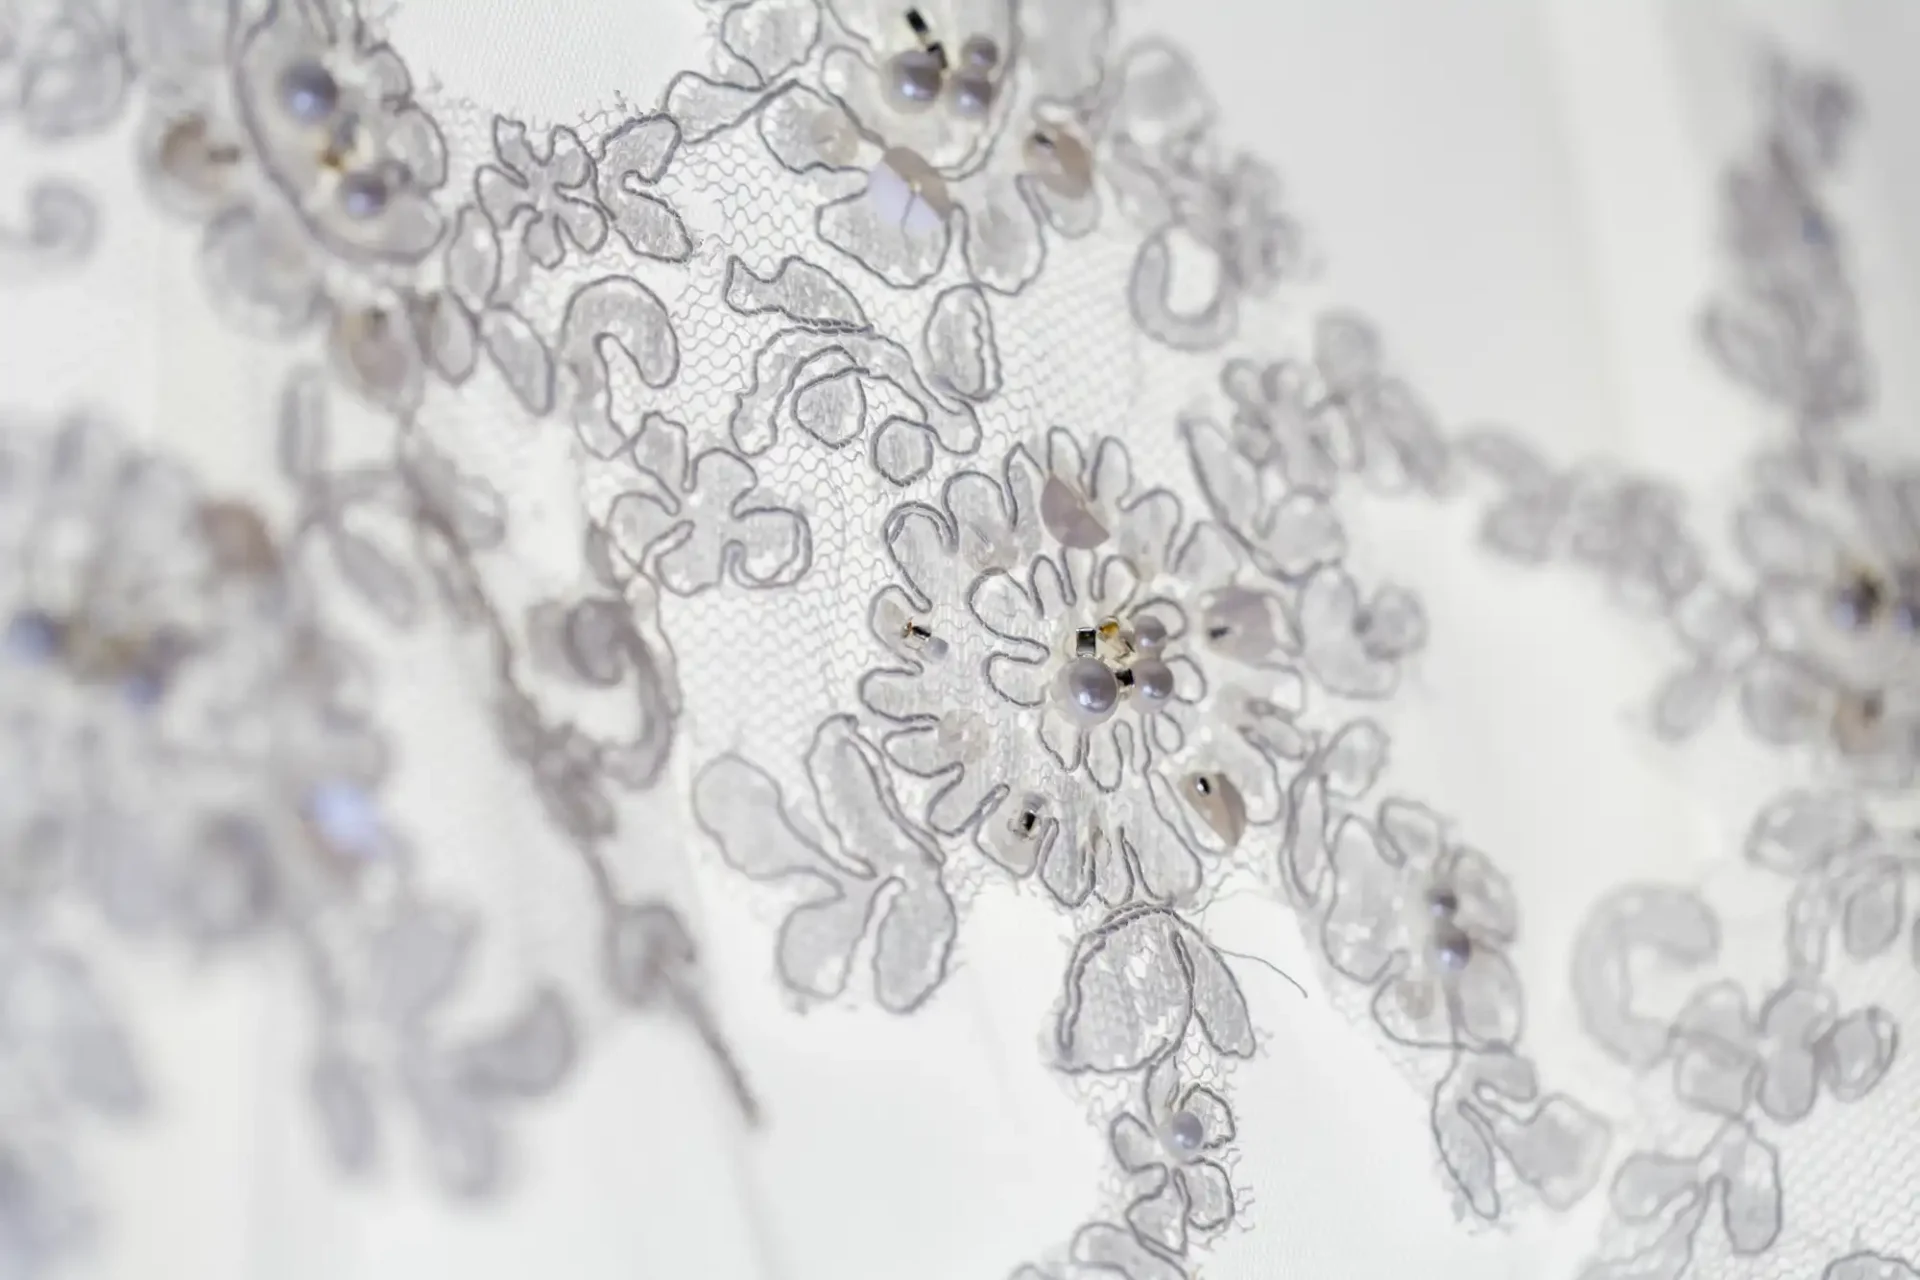 Close-up of a white lace fabric with intricate floral embroidery and small bead embellishments.